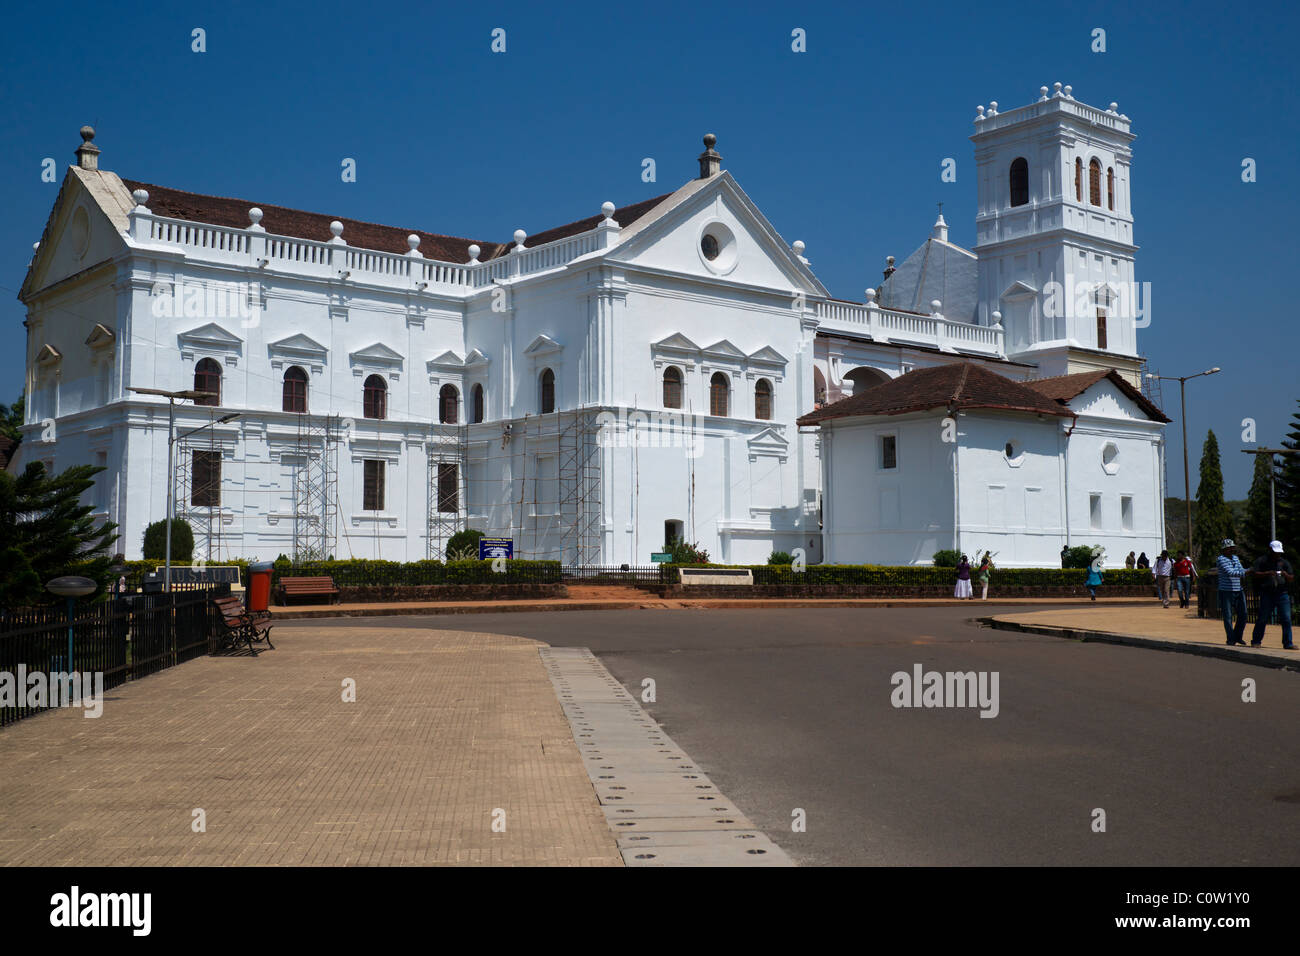 Se' Cathedral and the church of St Francis of Assisi Old, Goa, India Stock Photo